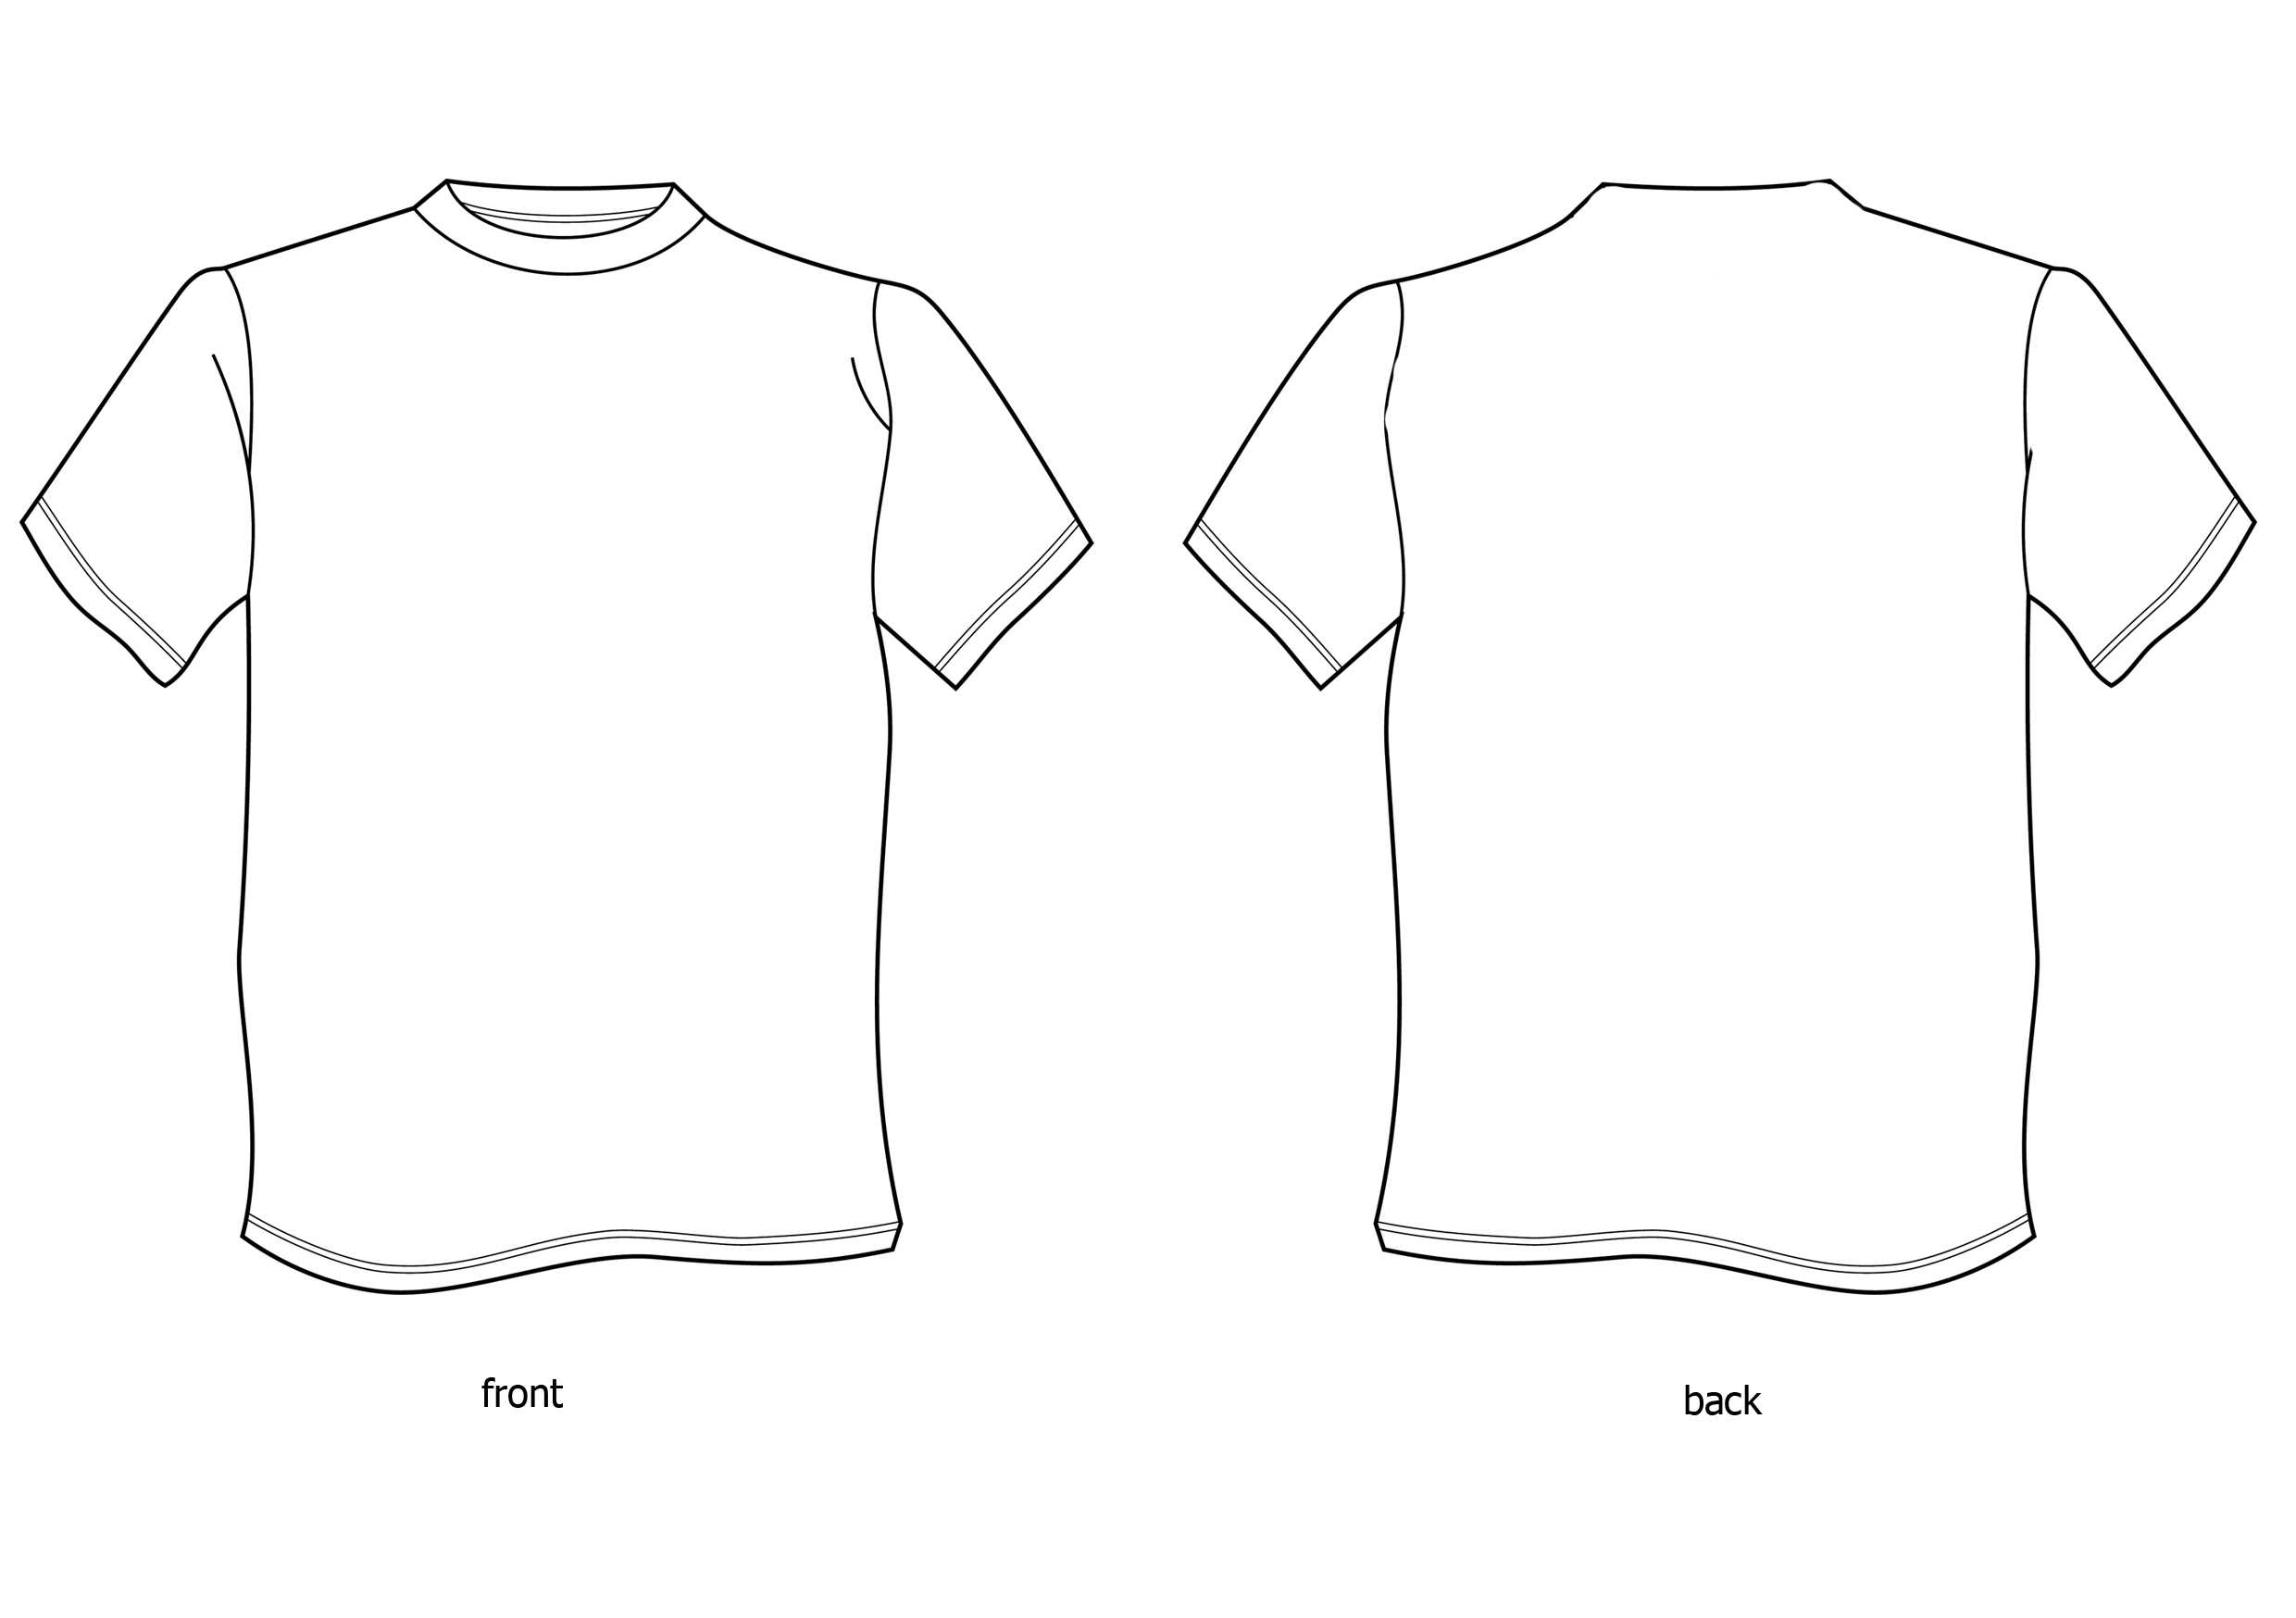 Free T Shirt Design Template, Download Free Clip Art, Free Throughout Blank T Shirt Design Template Psd